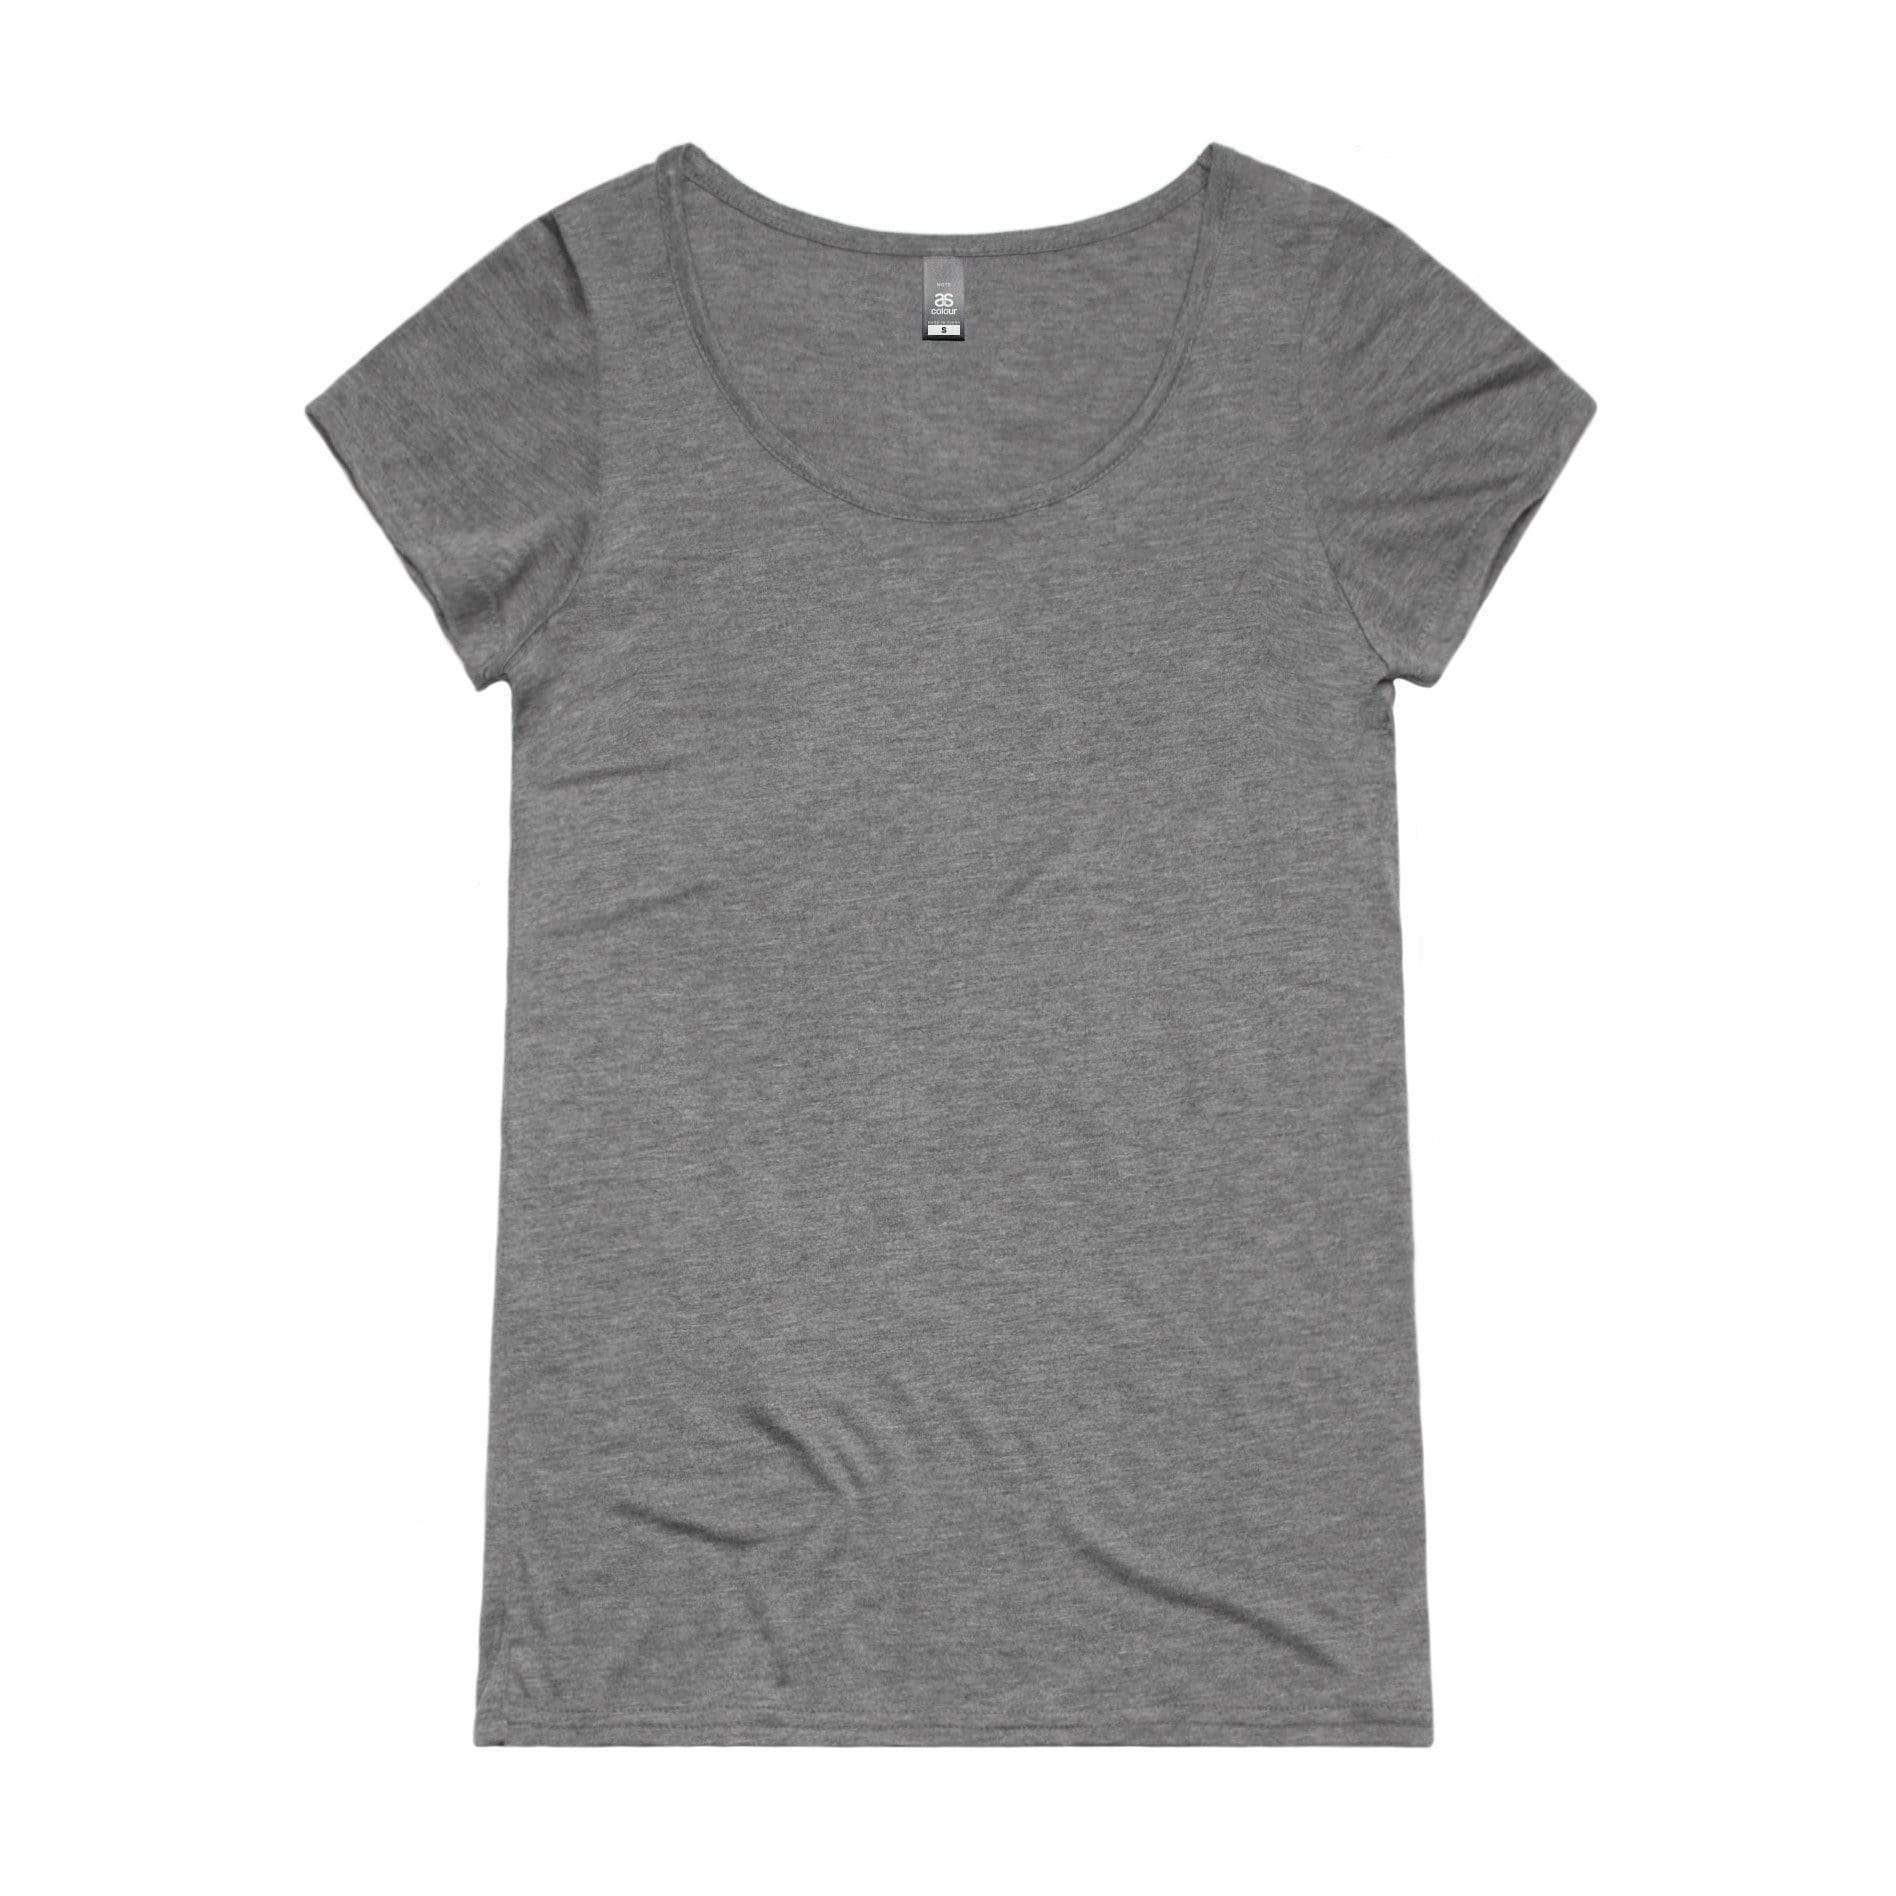 As Colour Casual Wear STEEL MARLE / XSM As Colour Women's note tee 4019